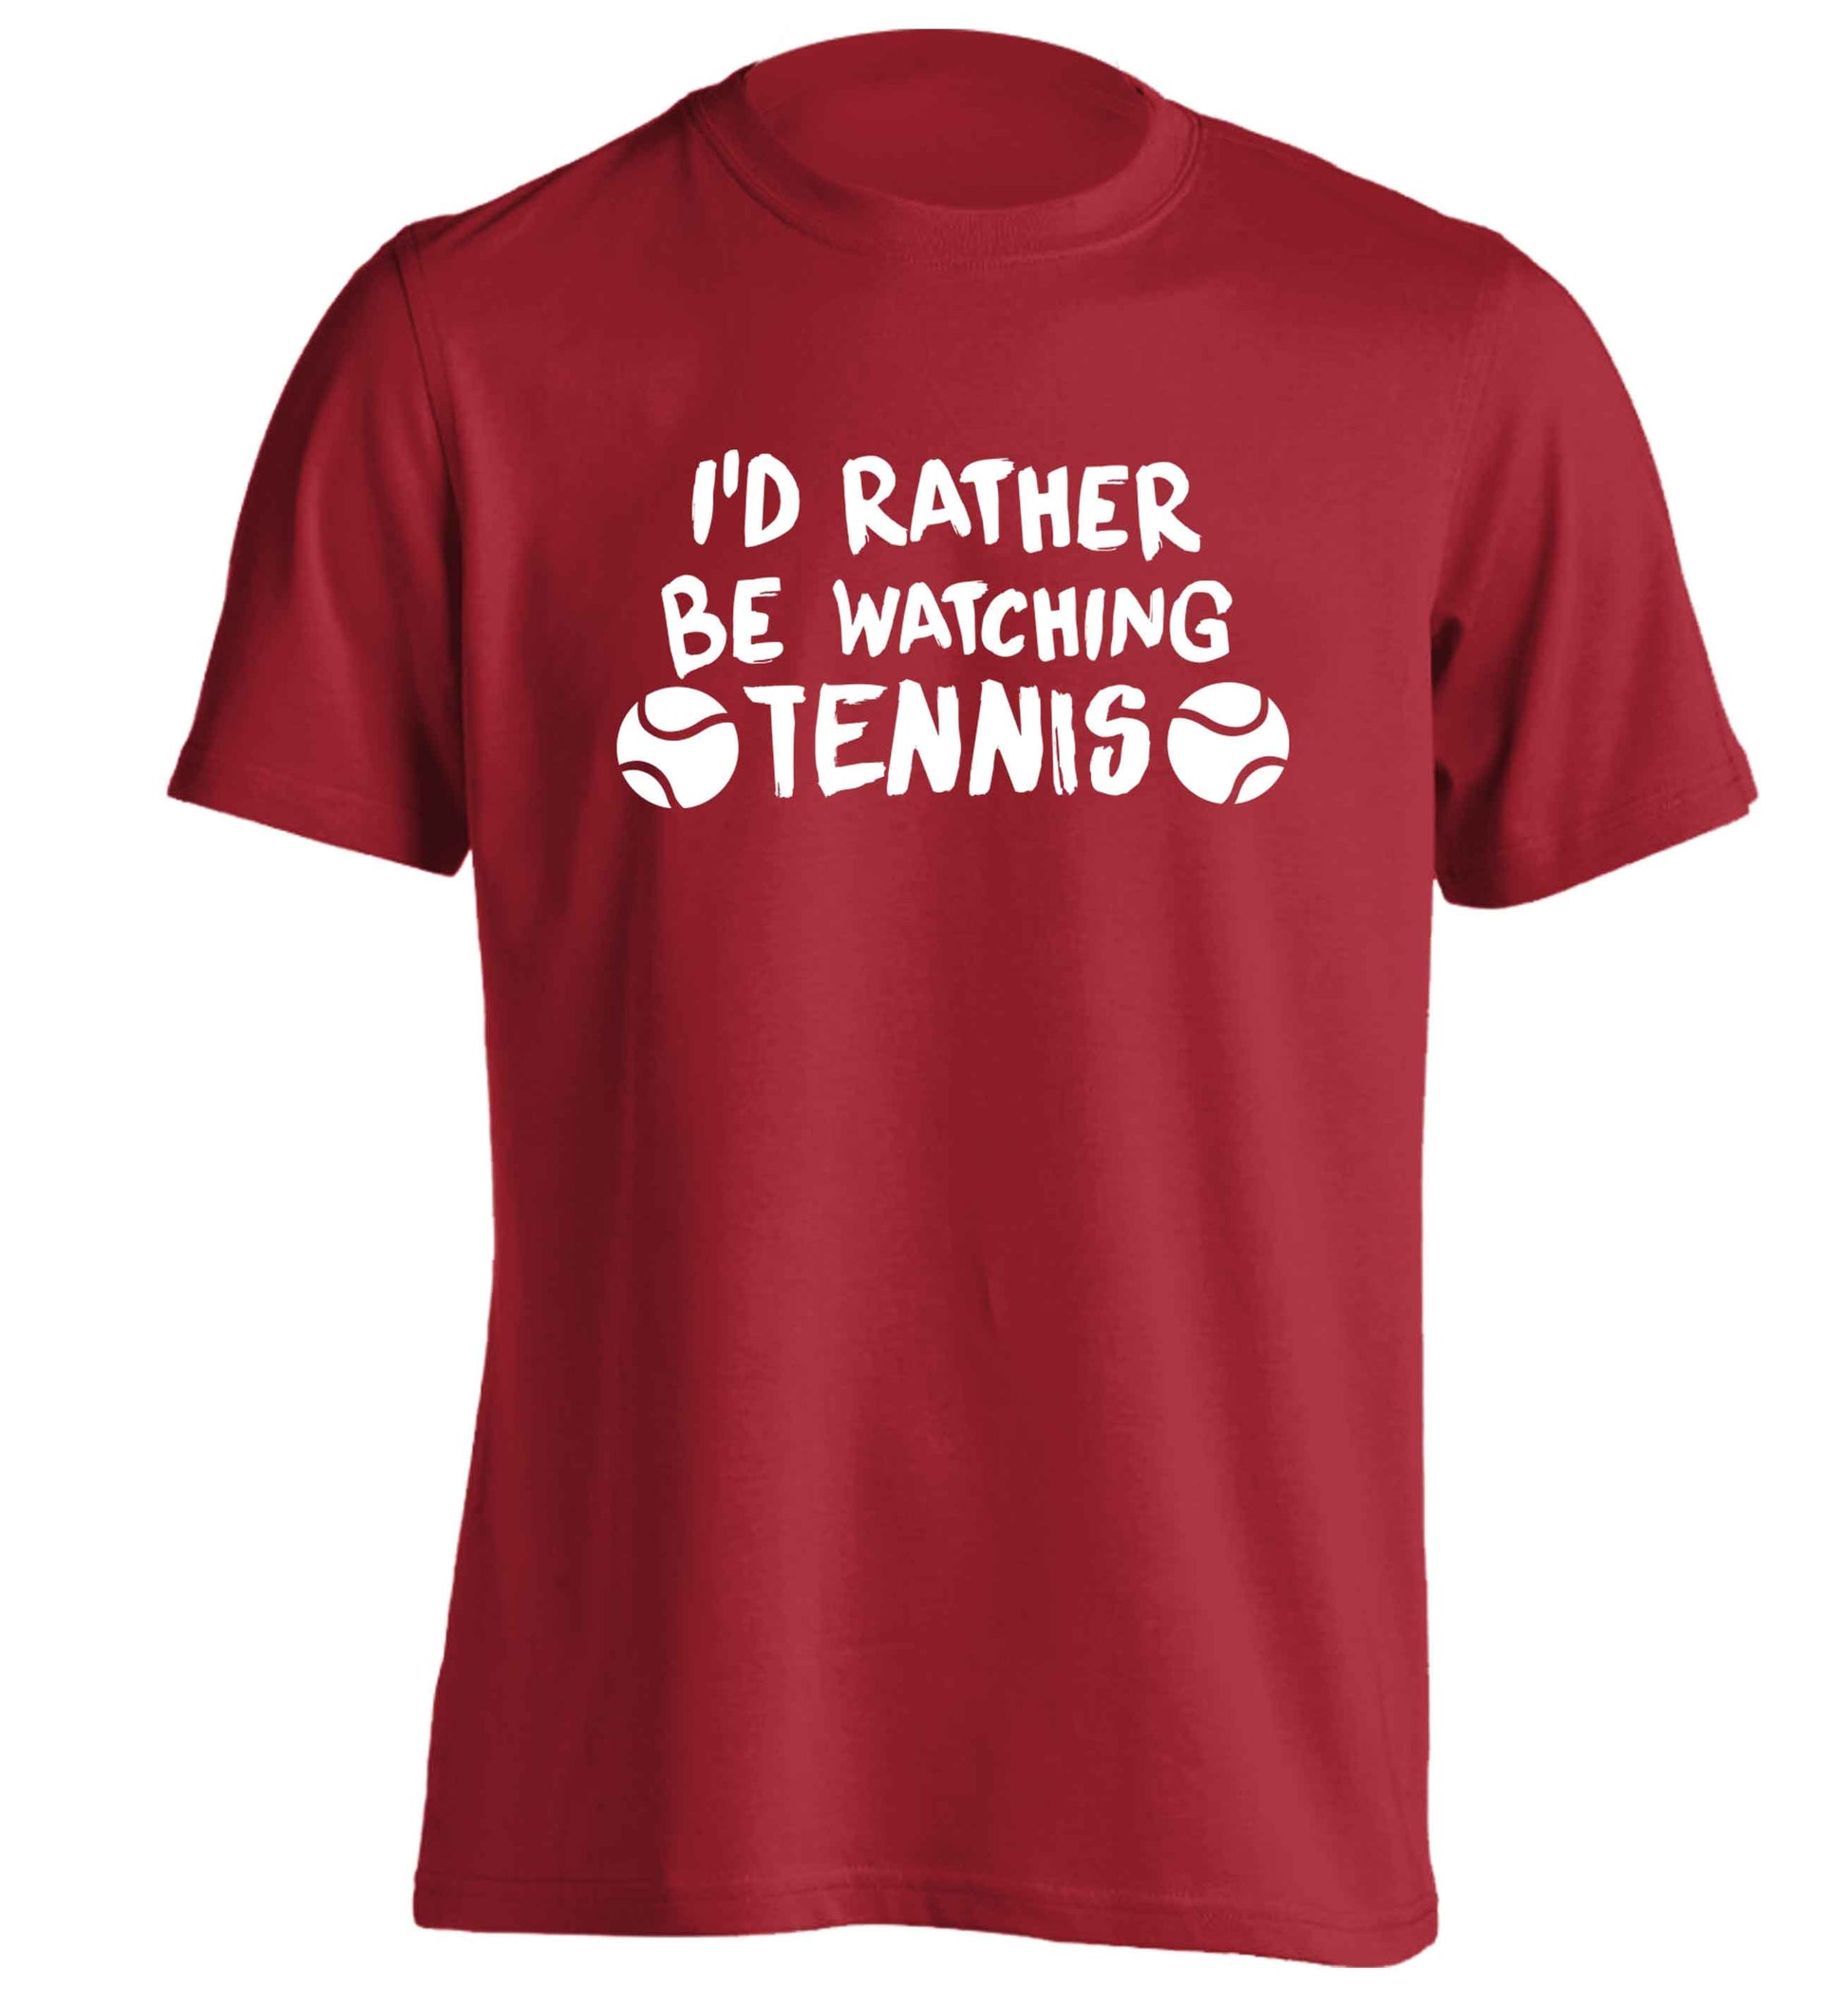 I'd rather be watching the tennis adults unisex red Tshirt 2XL